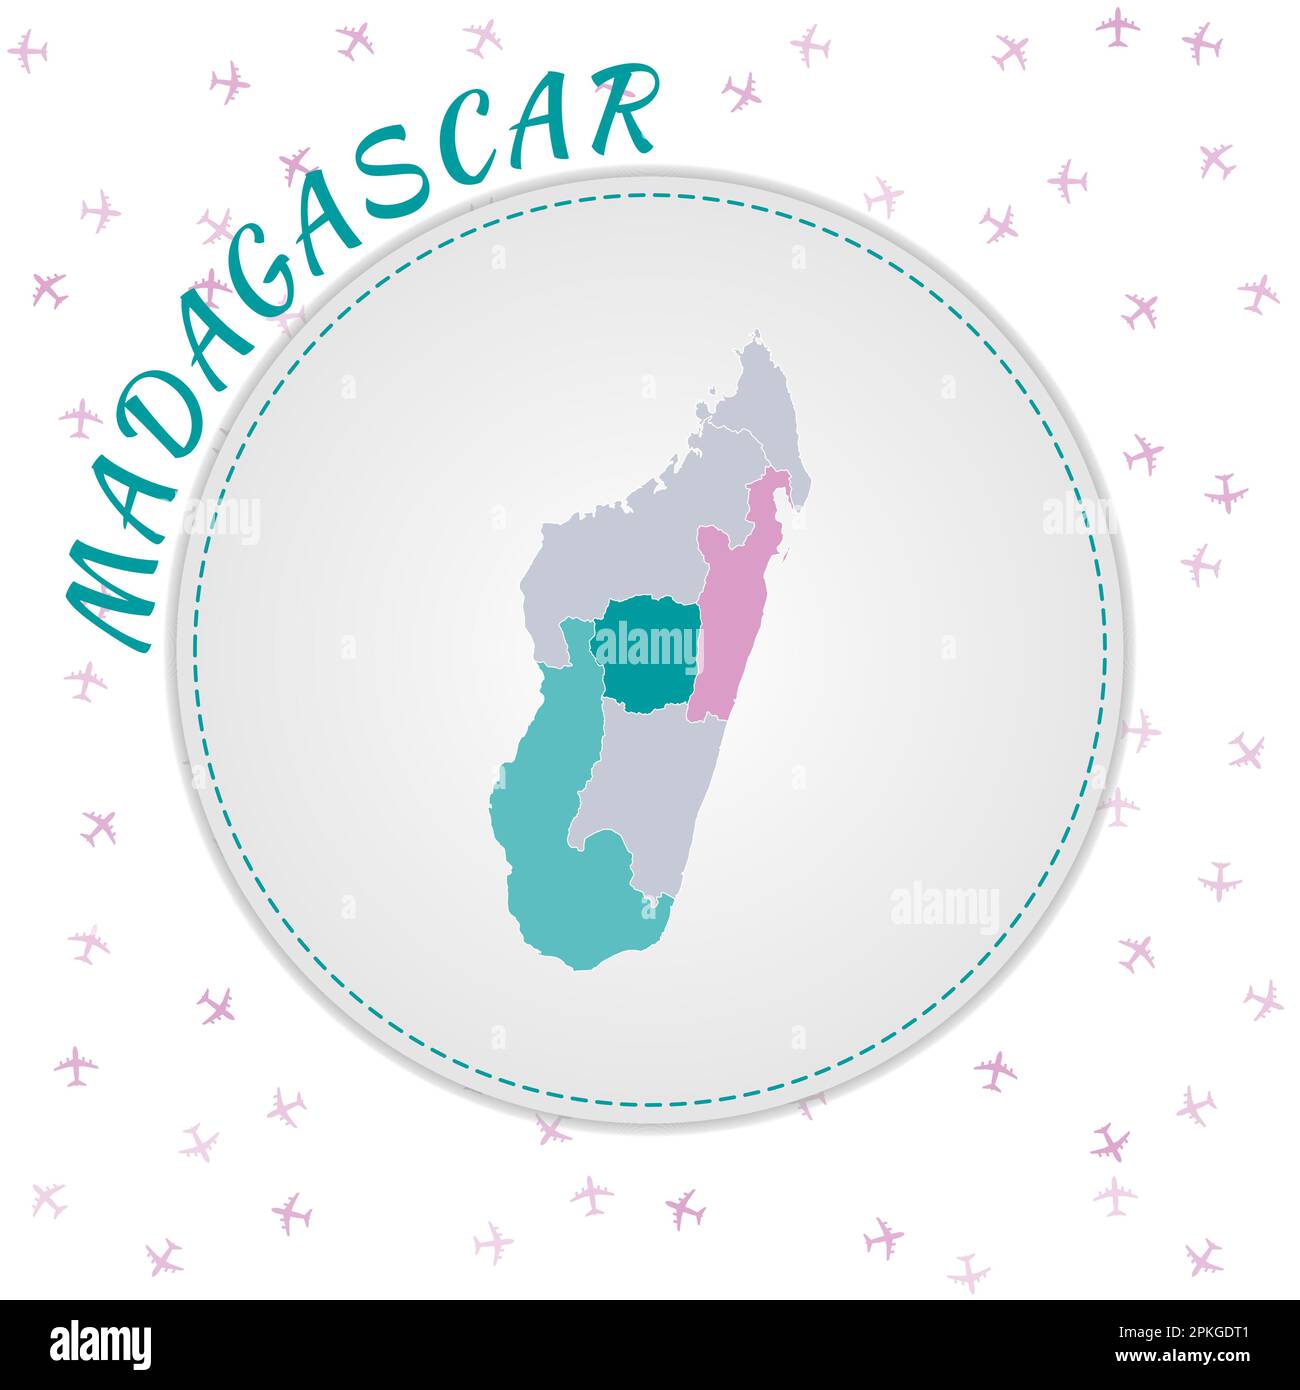 Madagascar map design. Map of the country with regions in emerald-amethyst color palette. Rounded travel to Madagascar poster with country name and ai Stock Vector